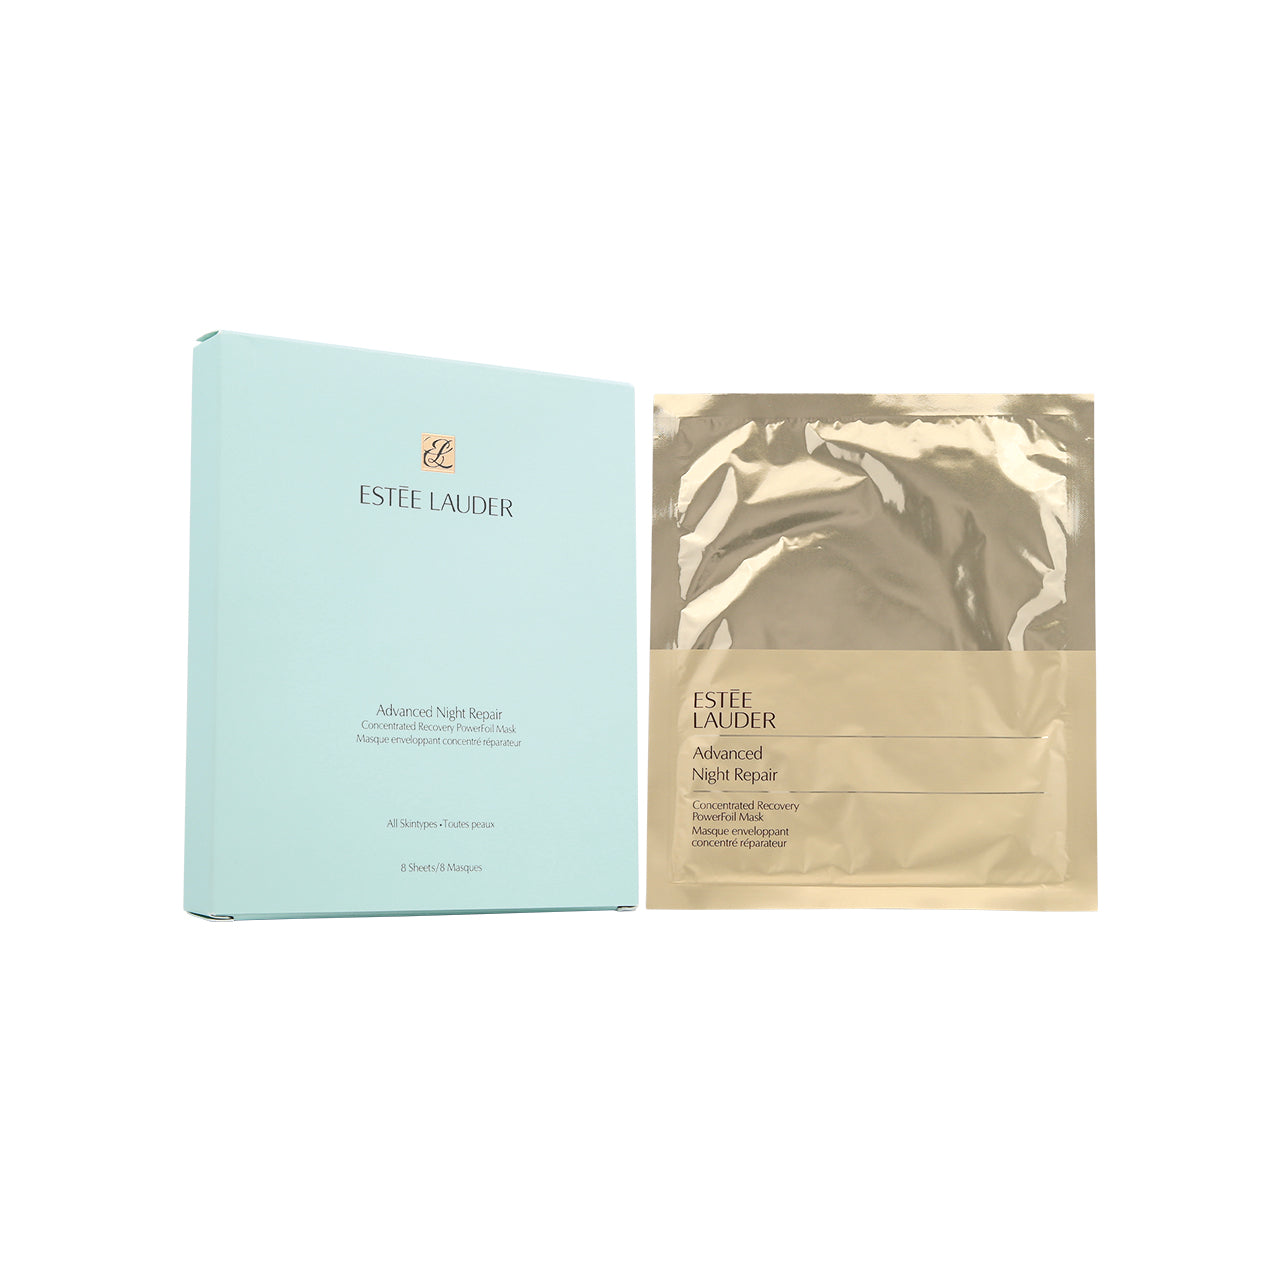 Estee Lauder Advanced Night Repair Concentrated Recovery PowerFoil Mask 8pcs | Sasa Global eShop